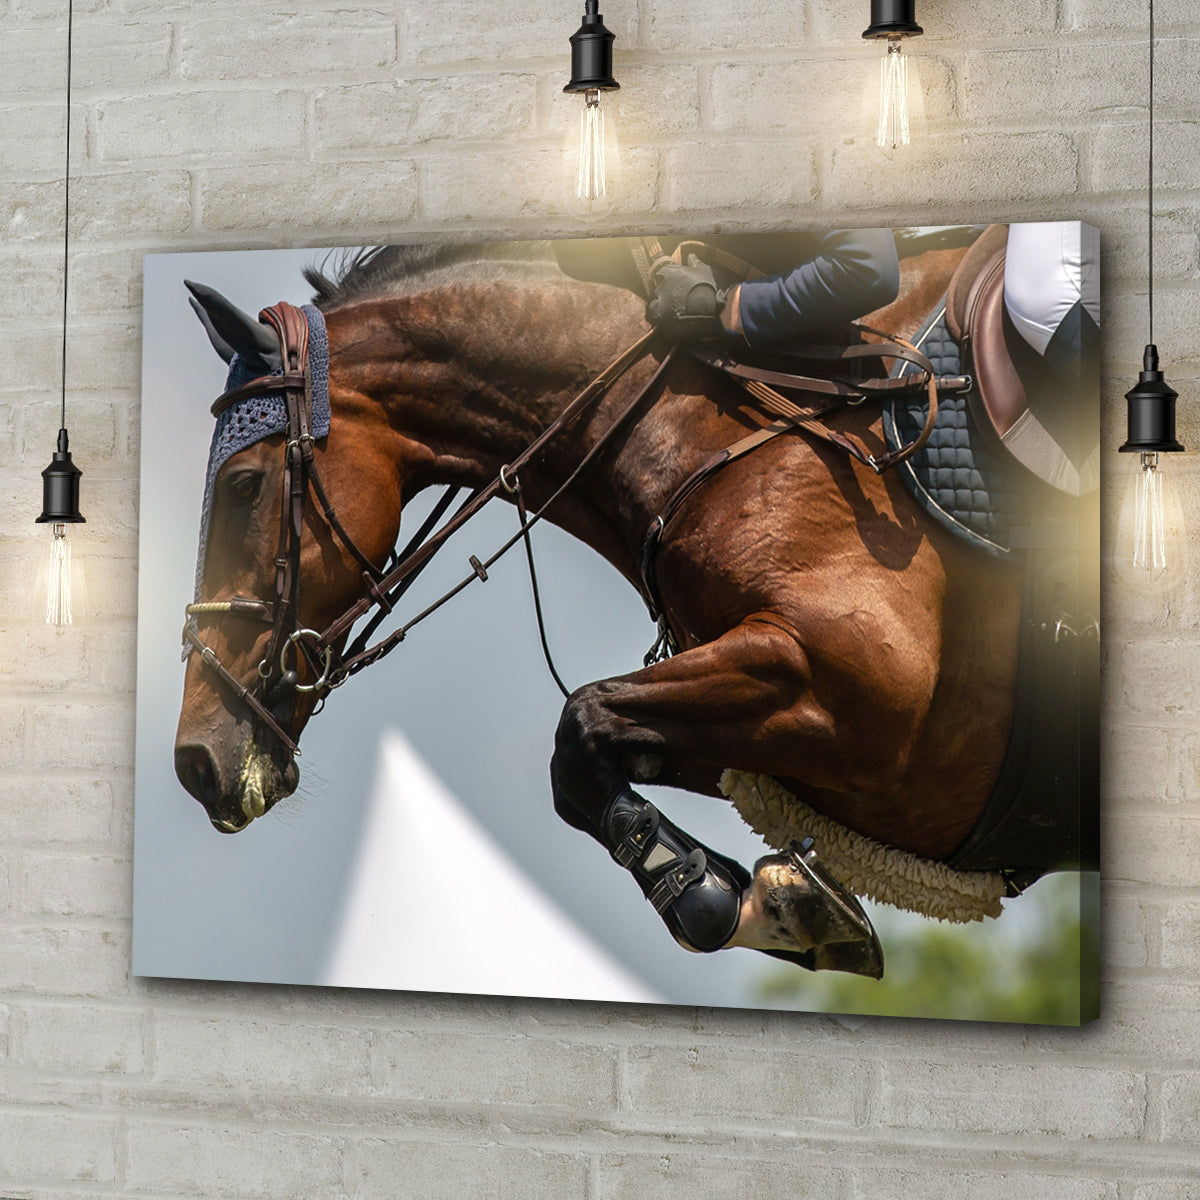 Equestrian Jumping Show Canvas Wall Art Style 1 - Image by Tailored Canvases